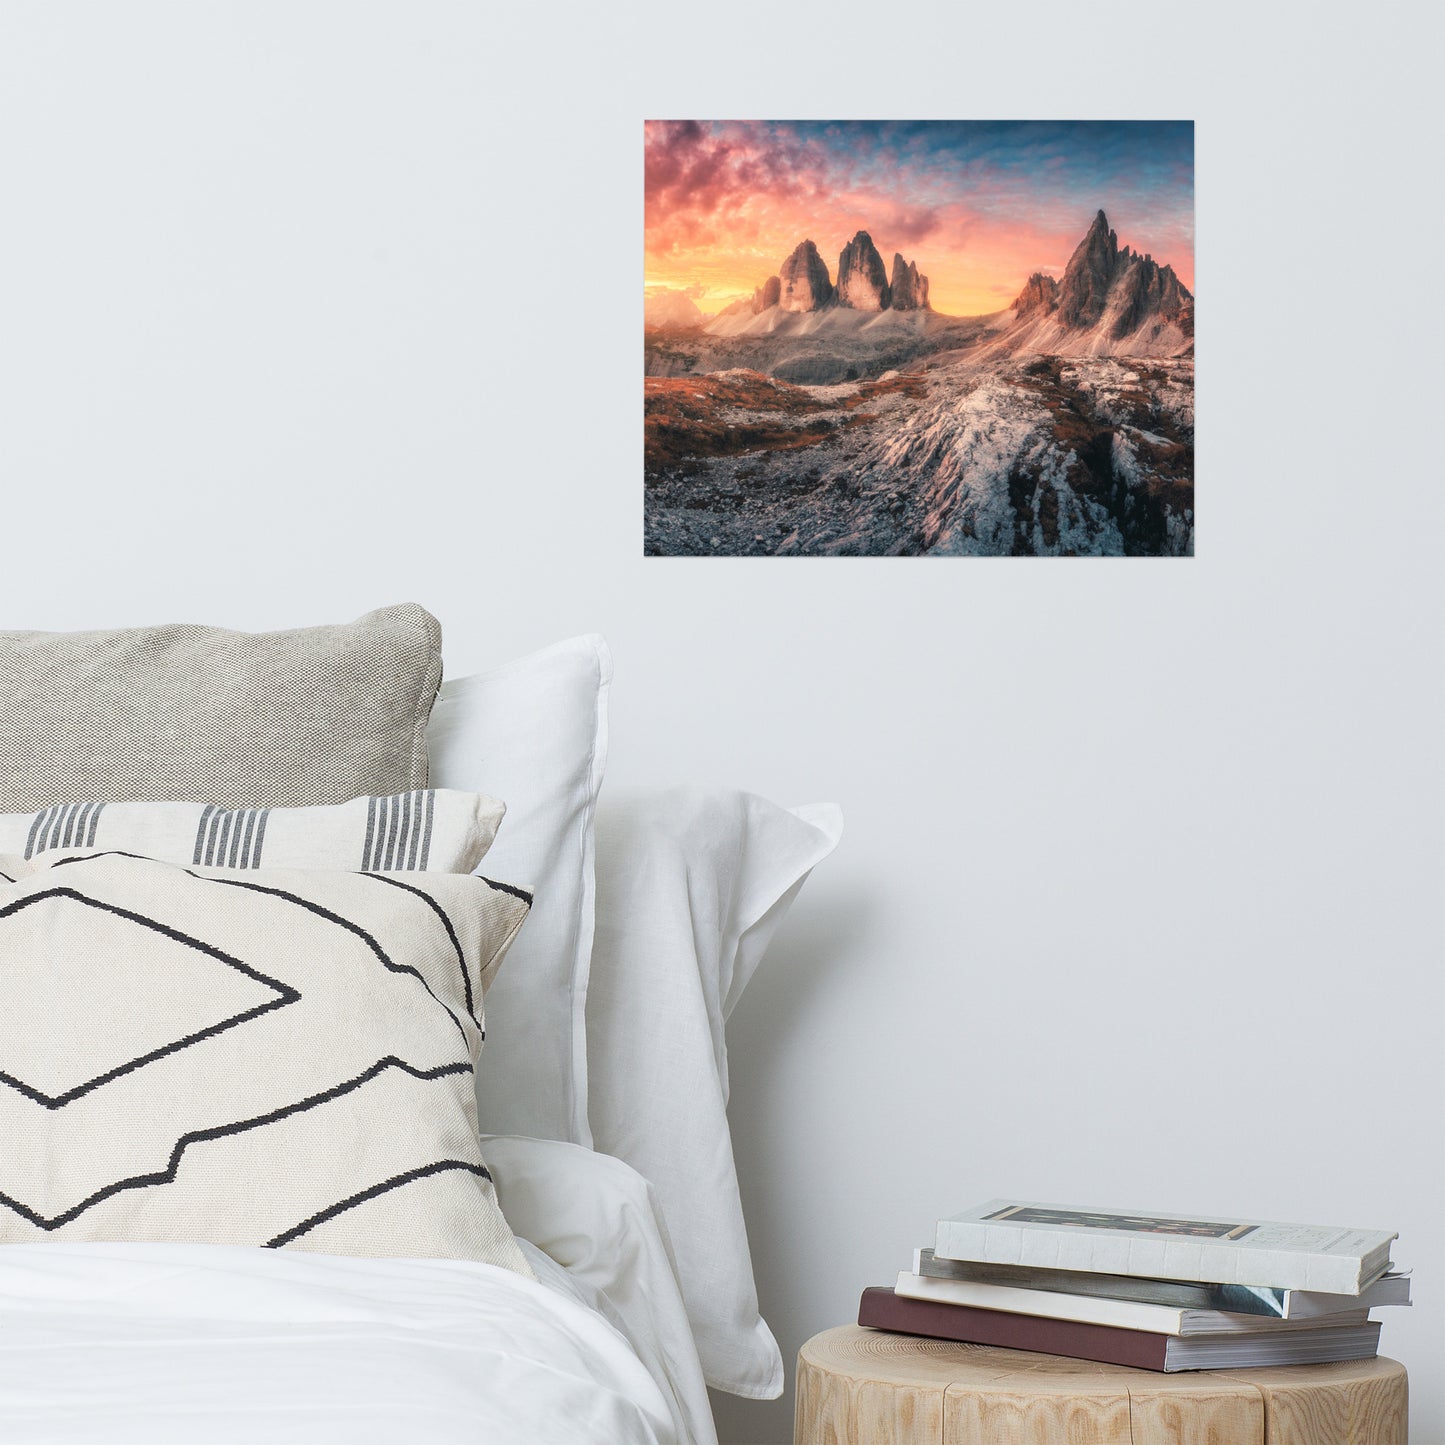 Mountains Colorful Cloudy Sunset 2 Landscape Photo Loose Wall Art Prints